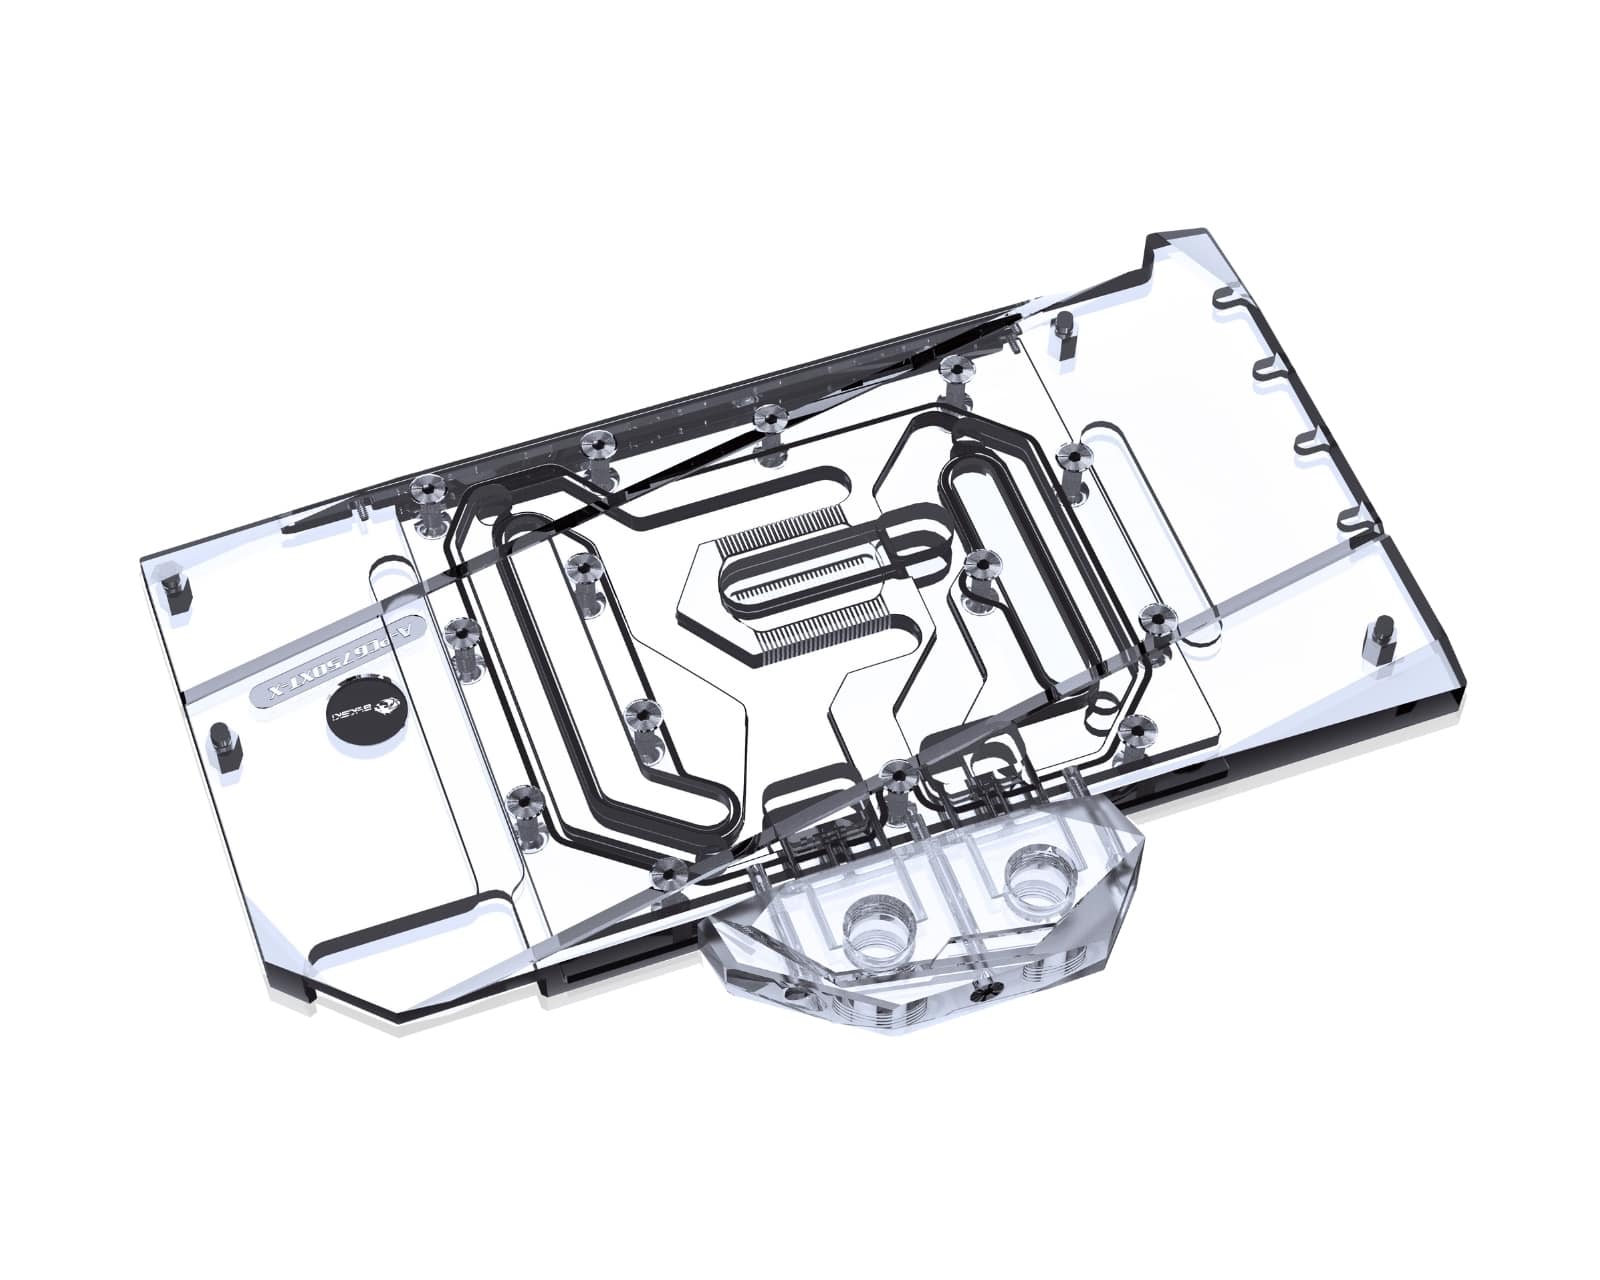 Bykski Full Coverage GPU Water Block and Backplate for PowerColor RX 6750 XT Red Devil (A-PC6750XT-X) - PrimoChill - KEEPING IT COOL